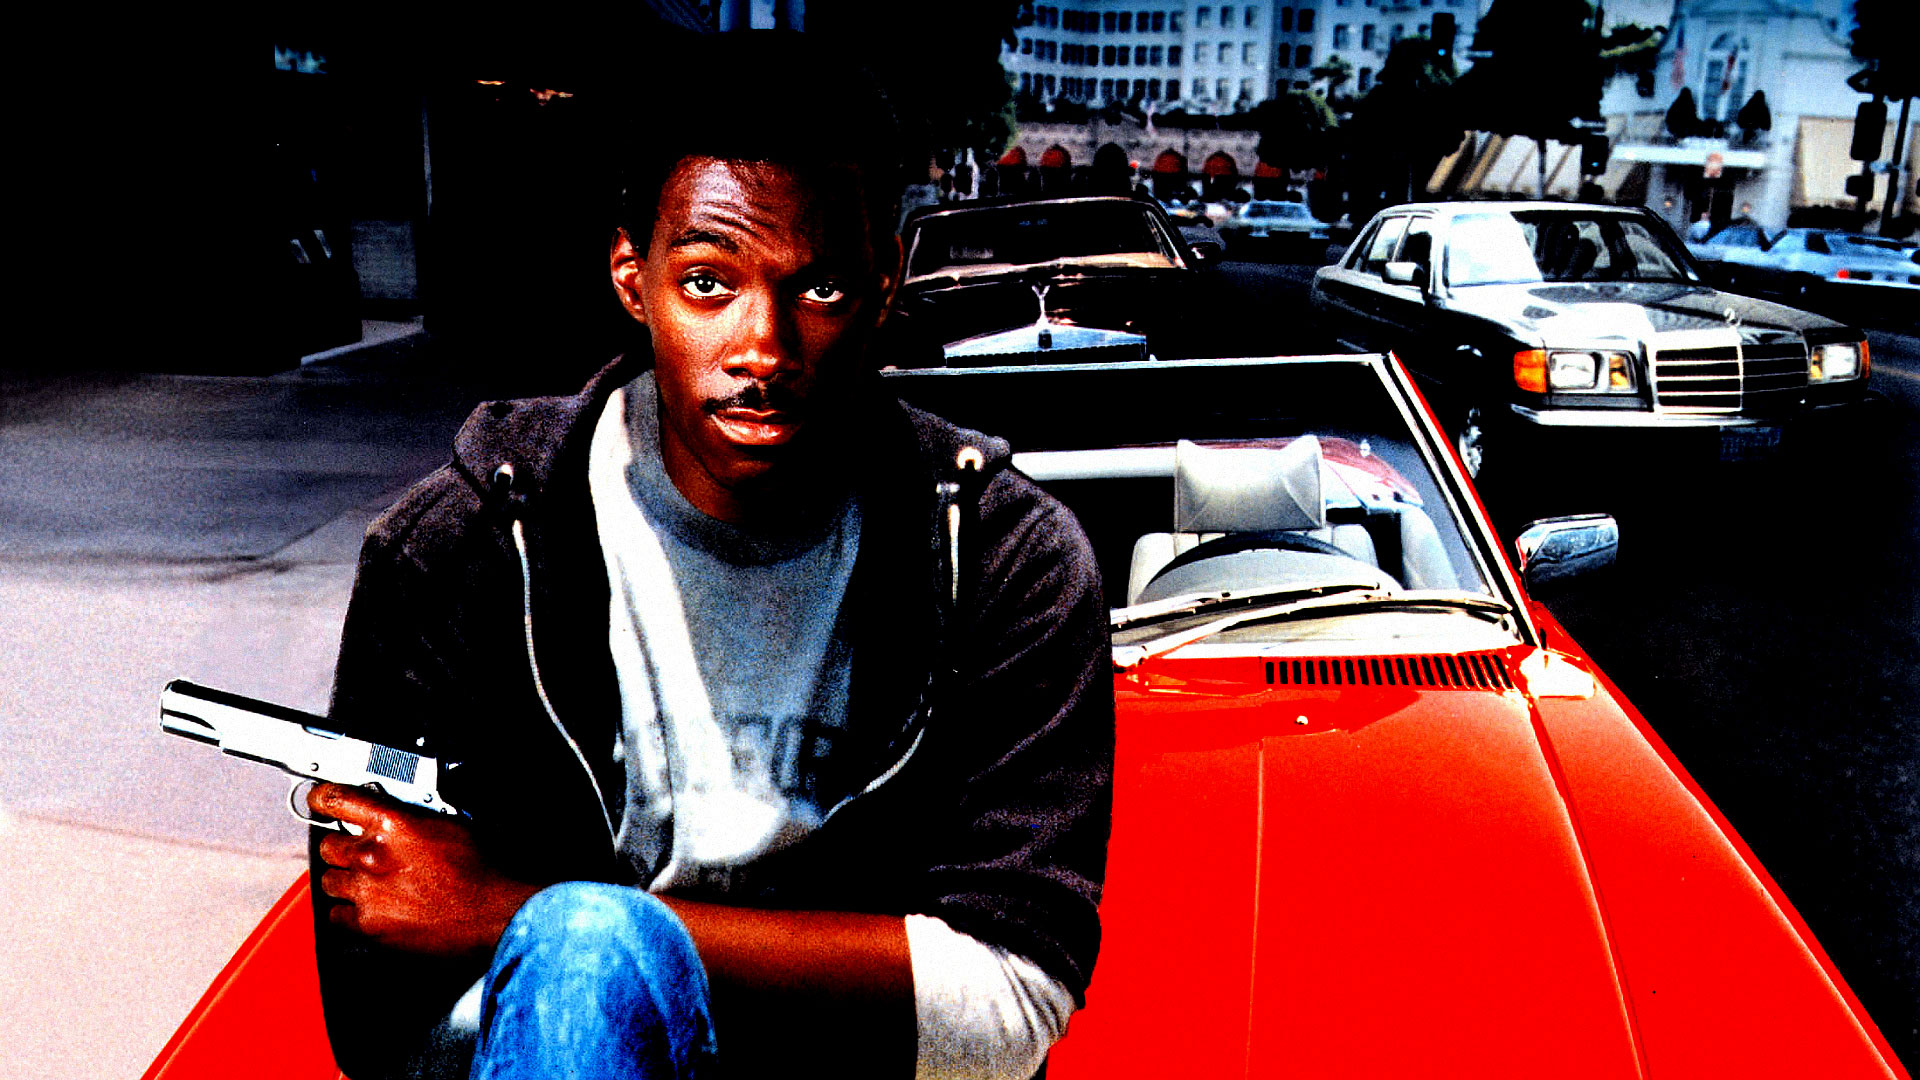 movie, beverly hills cop lock screen backgrounds